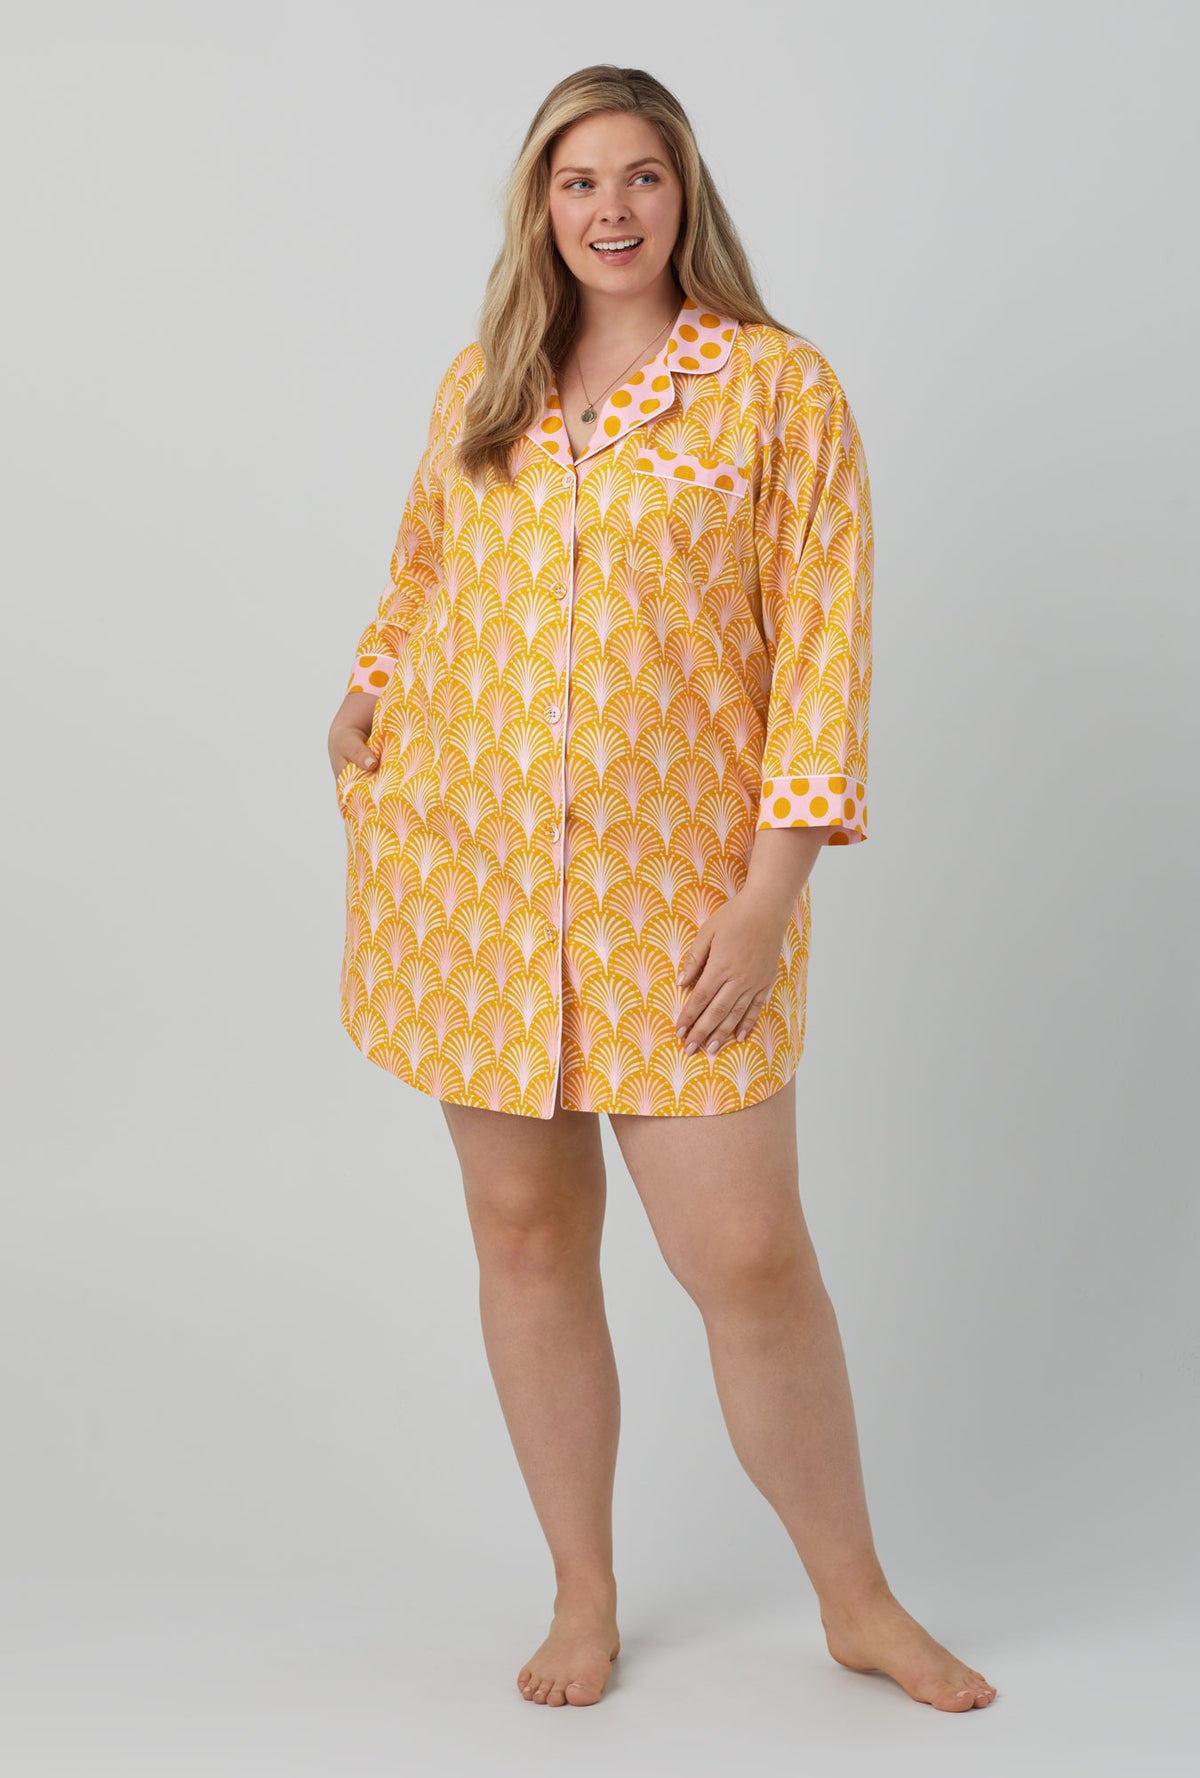 A lady wearing 3/4 sleeve classic woven cotton poplin sleepshirt with suite life print